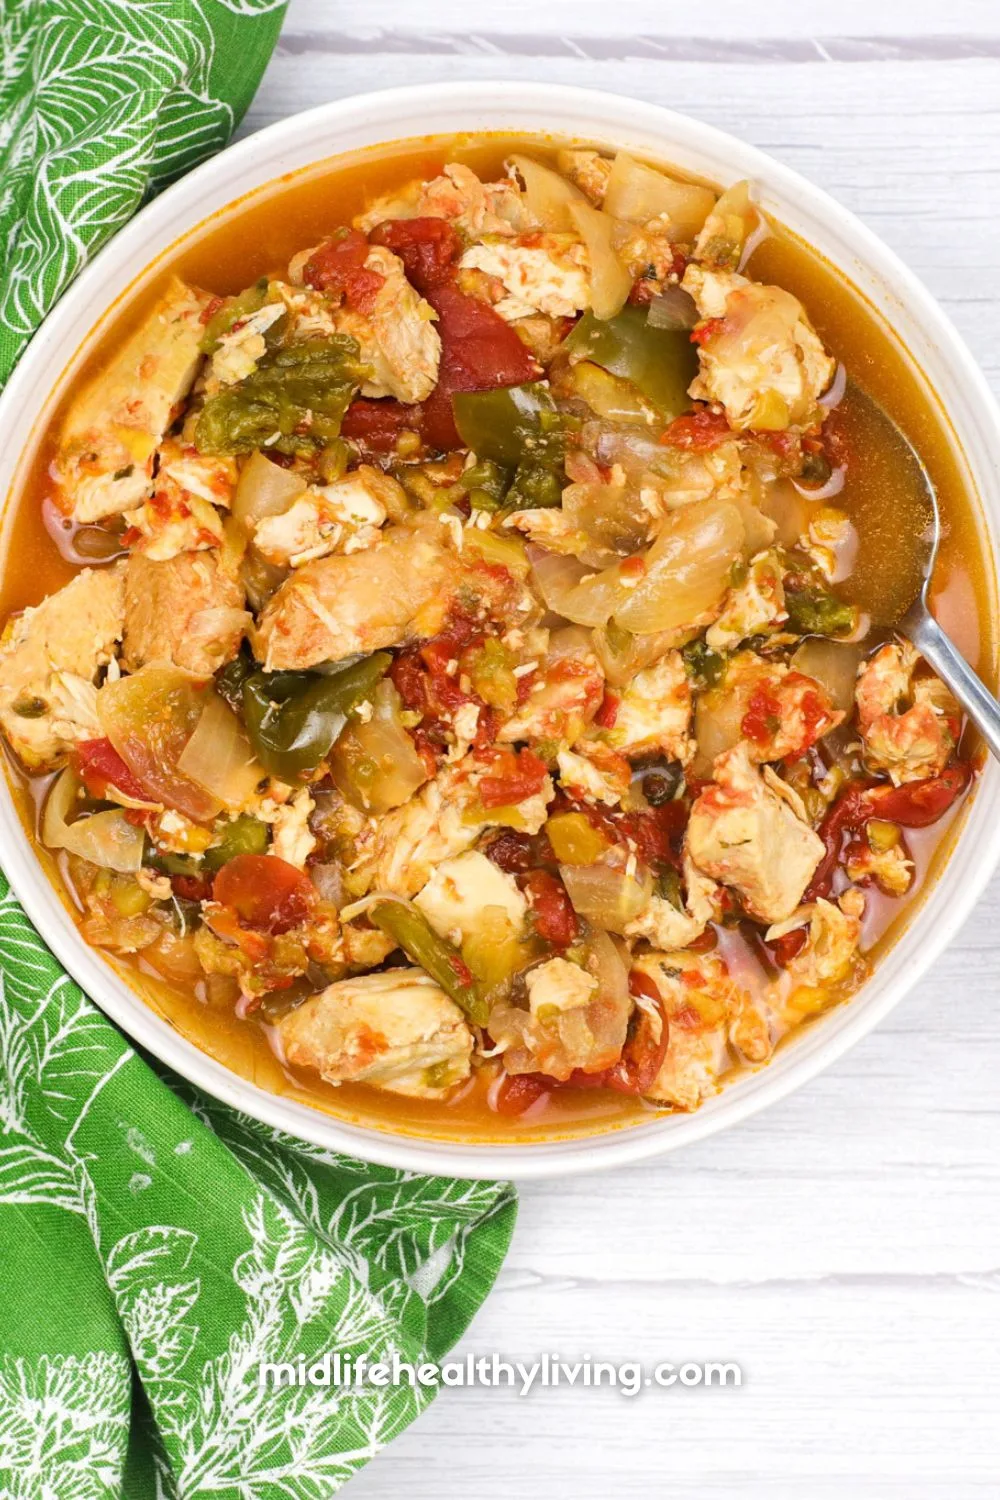 a bowl from above filled with the sweet and sour chicken weight watchers recipe.